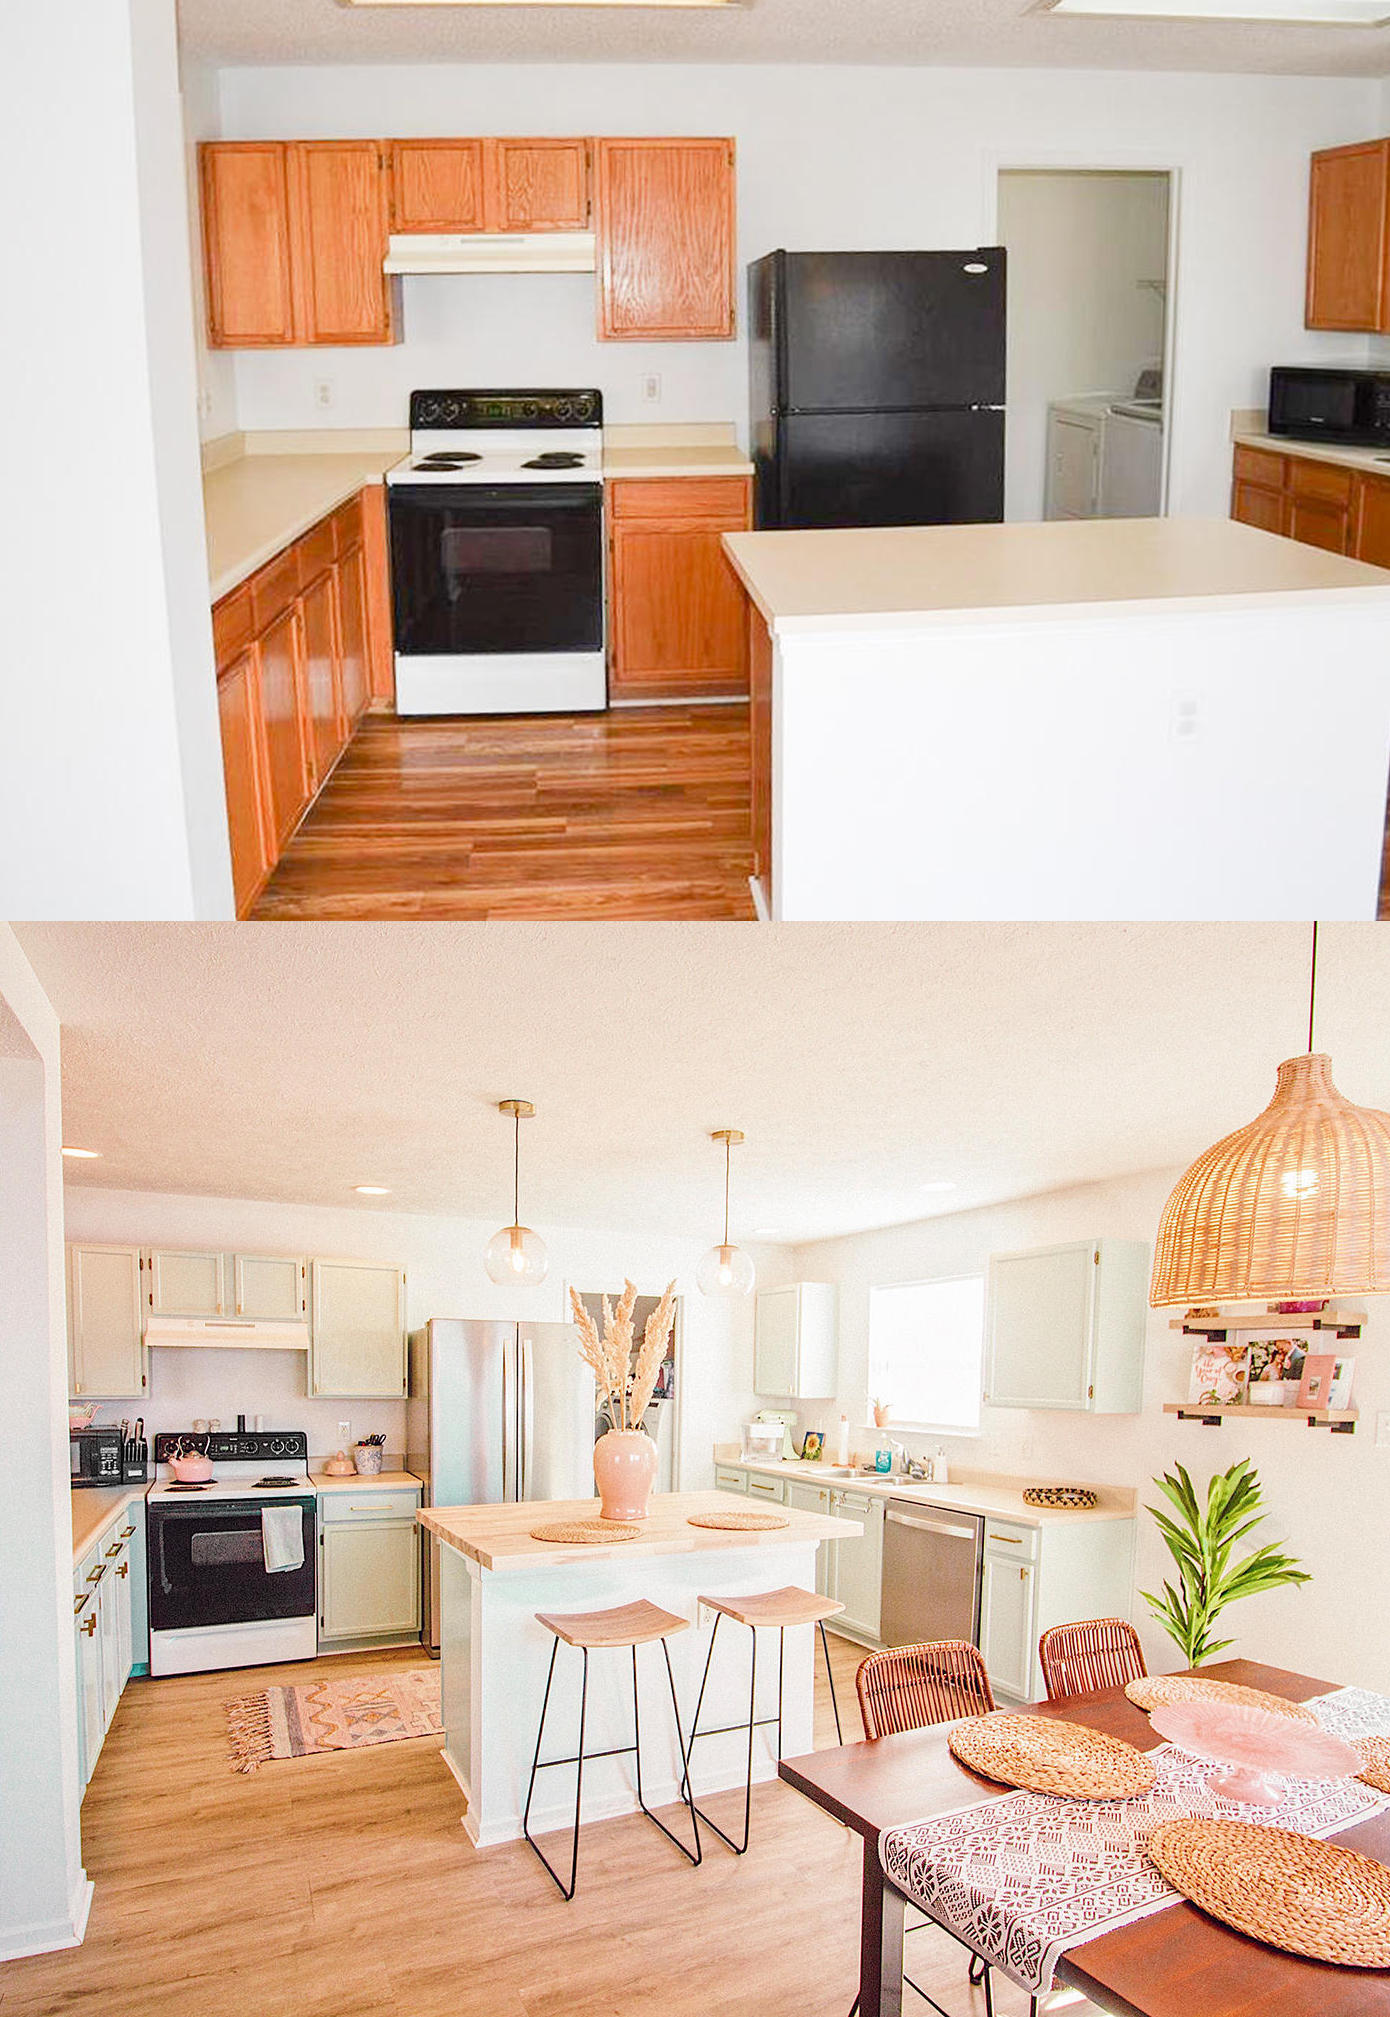 Our House: Before & After Transformation